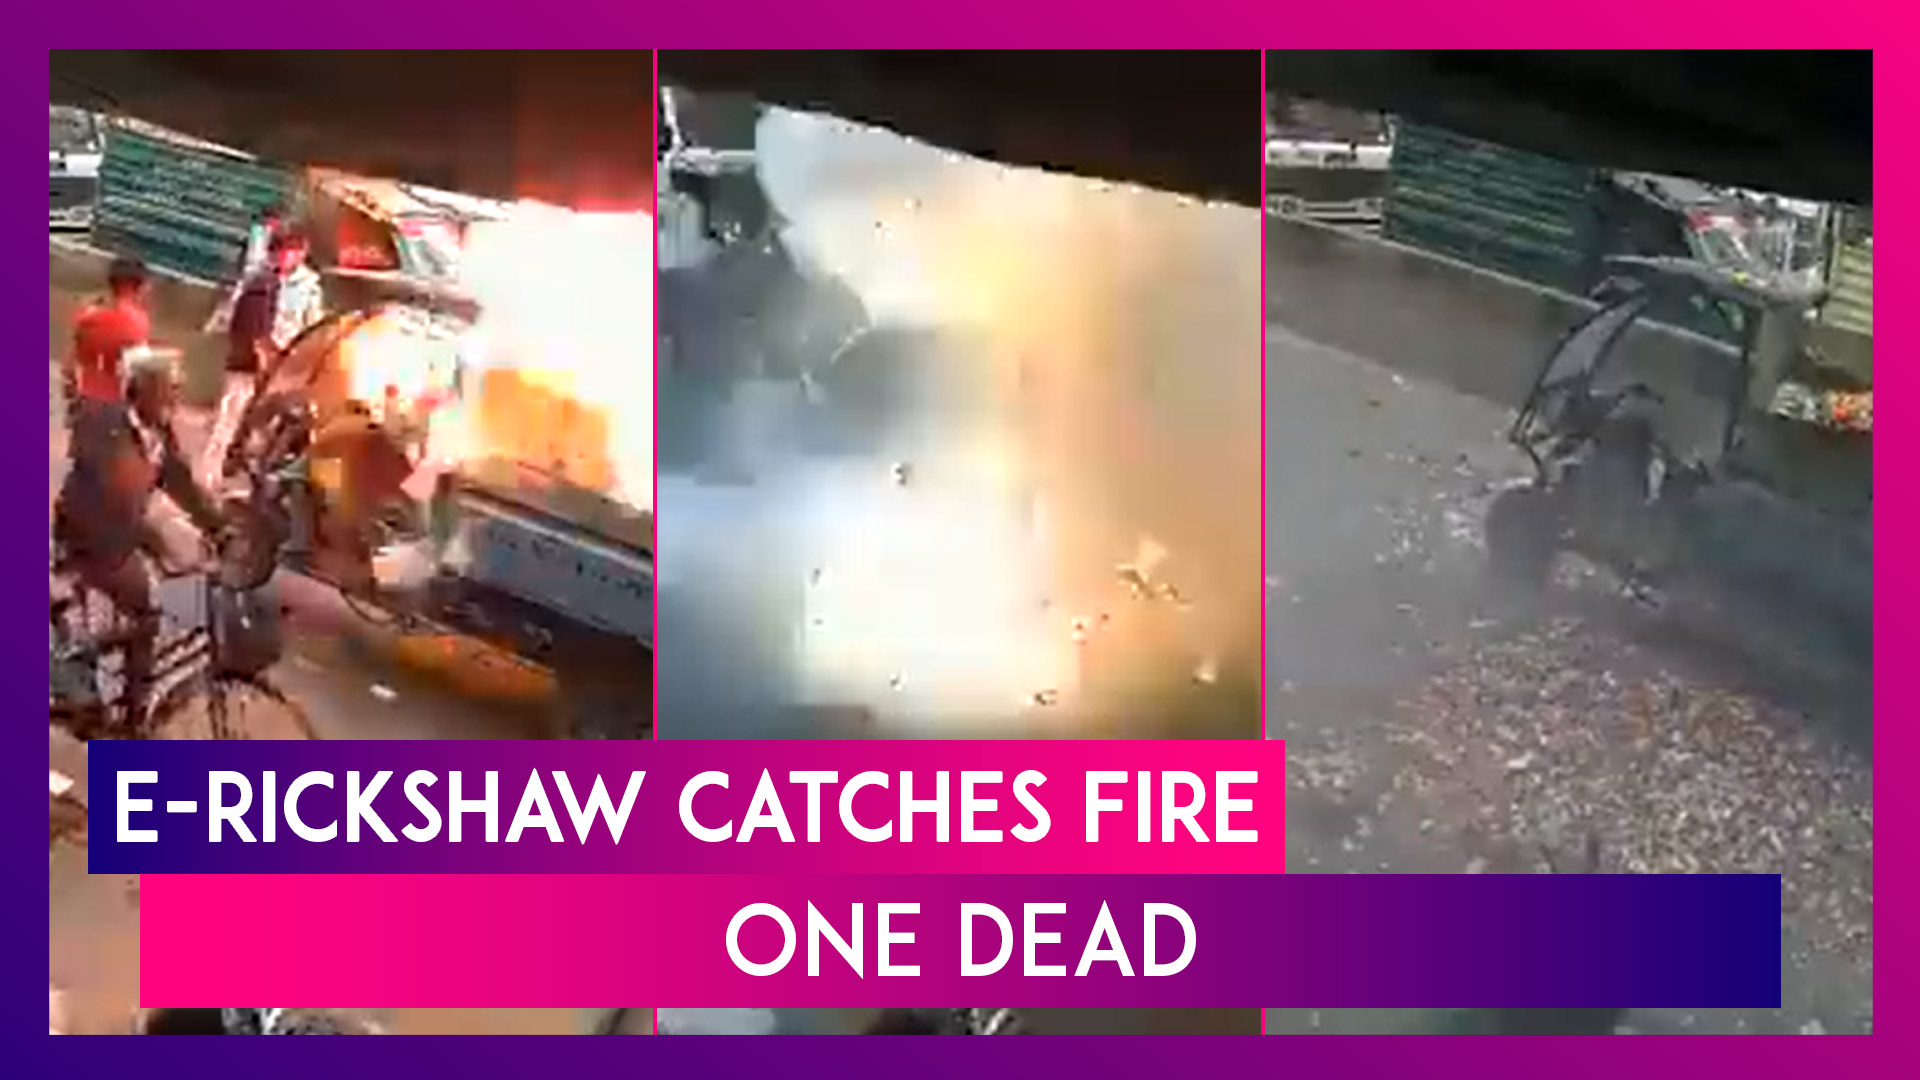 Rikshaw Sex - E-Rickshaw Carrying Firecrackers Catches Fire During Jagannath Yatra In  Greater Noida, One Dead; Video Goes Viral | Watch Videos From LatestLY